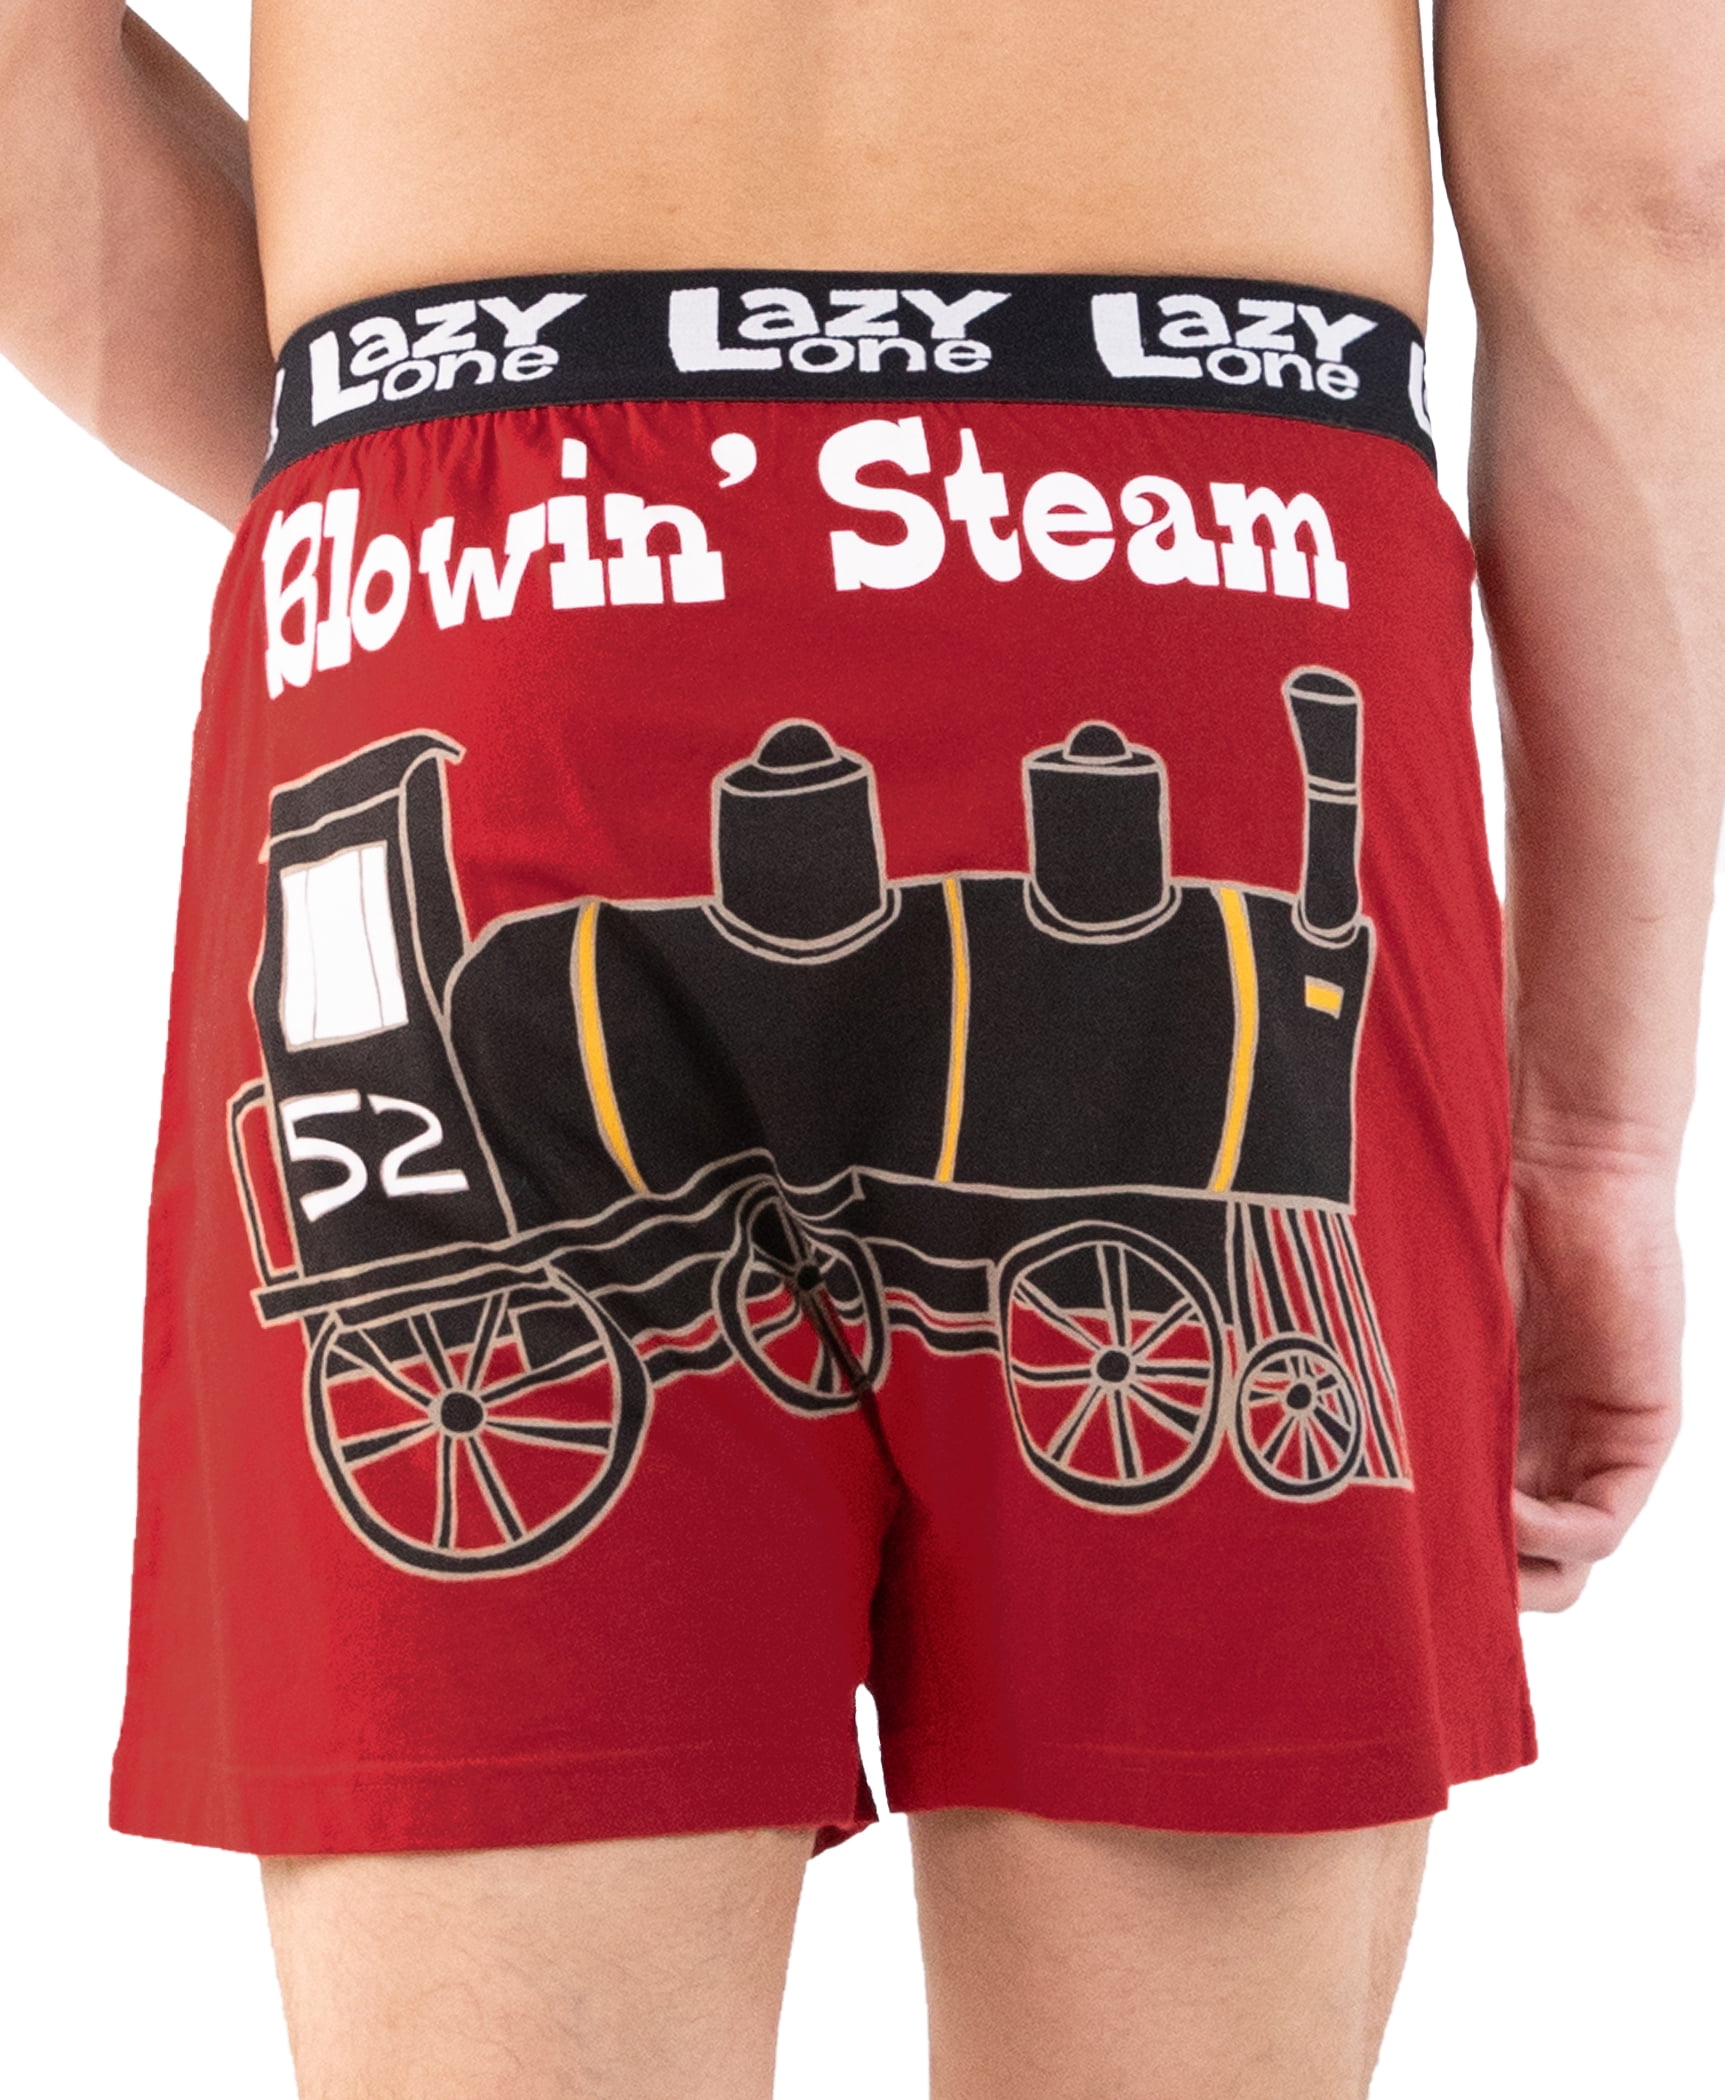 Novelty Boxer Shorts Gag Gifts for Men Blowin Steam, Small Lazy One Funny Boxers Humorous Underwear